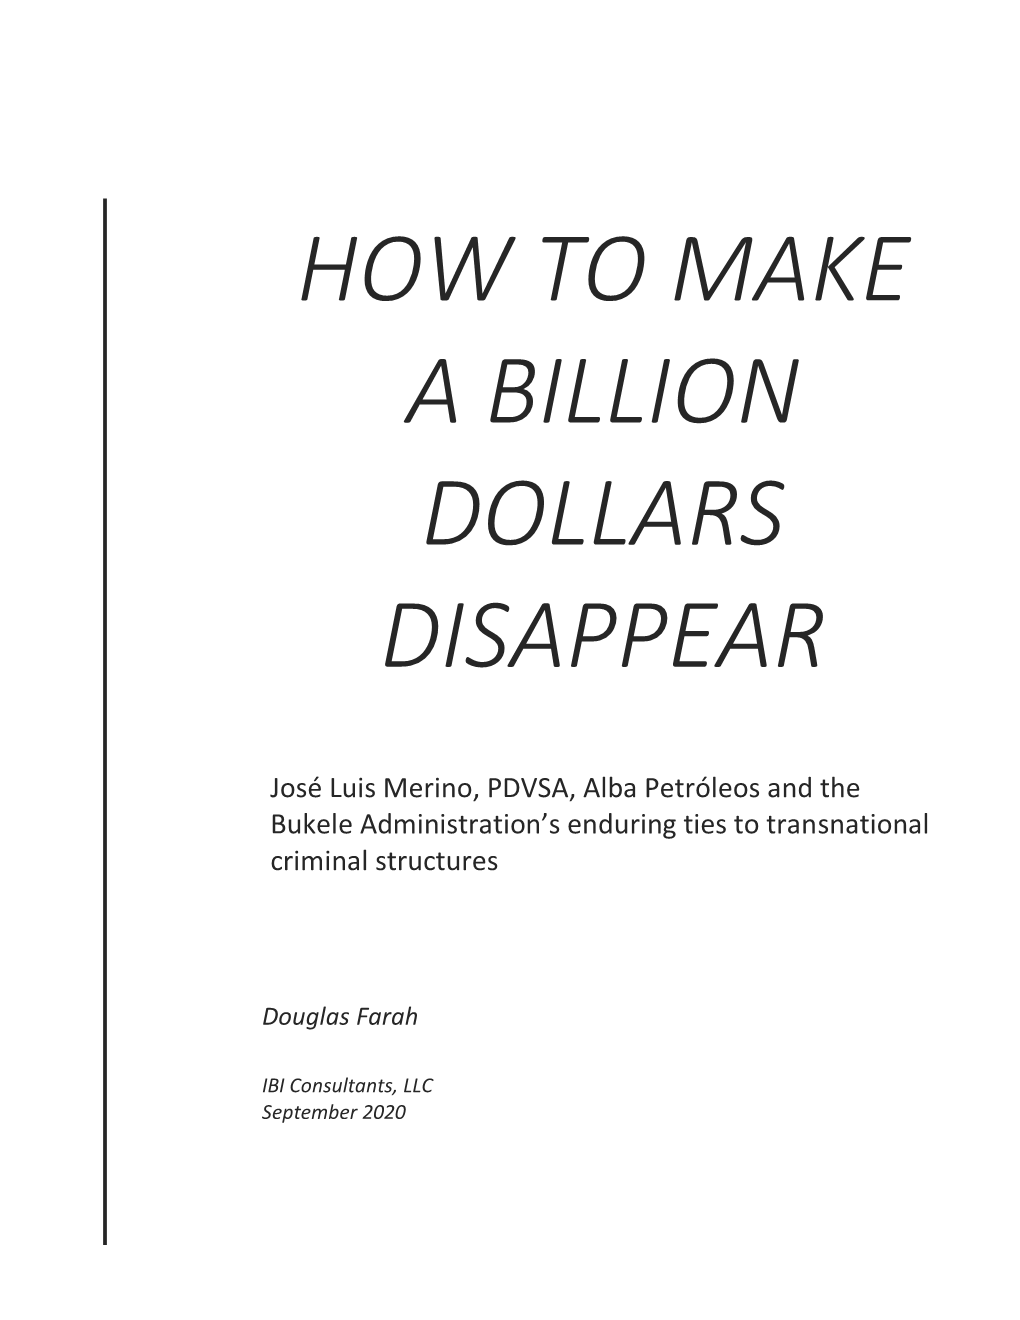 How to Make a Billion Dollars Disappear